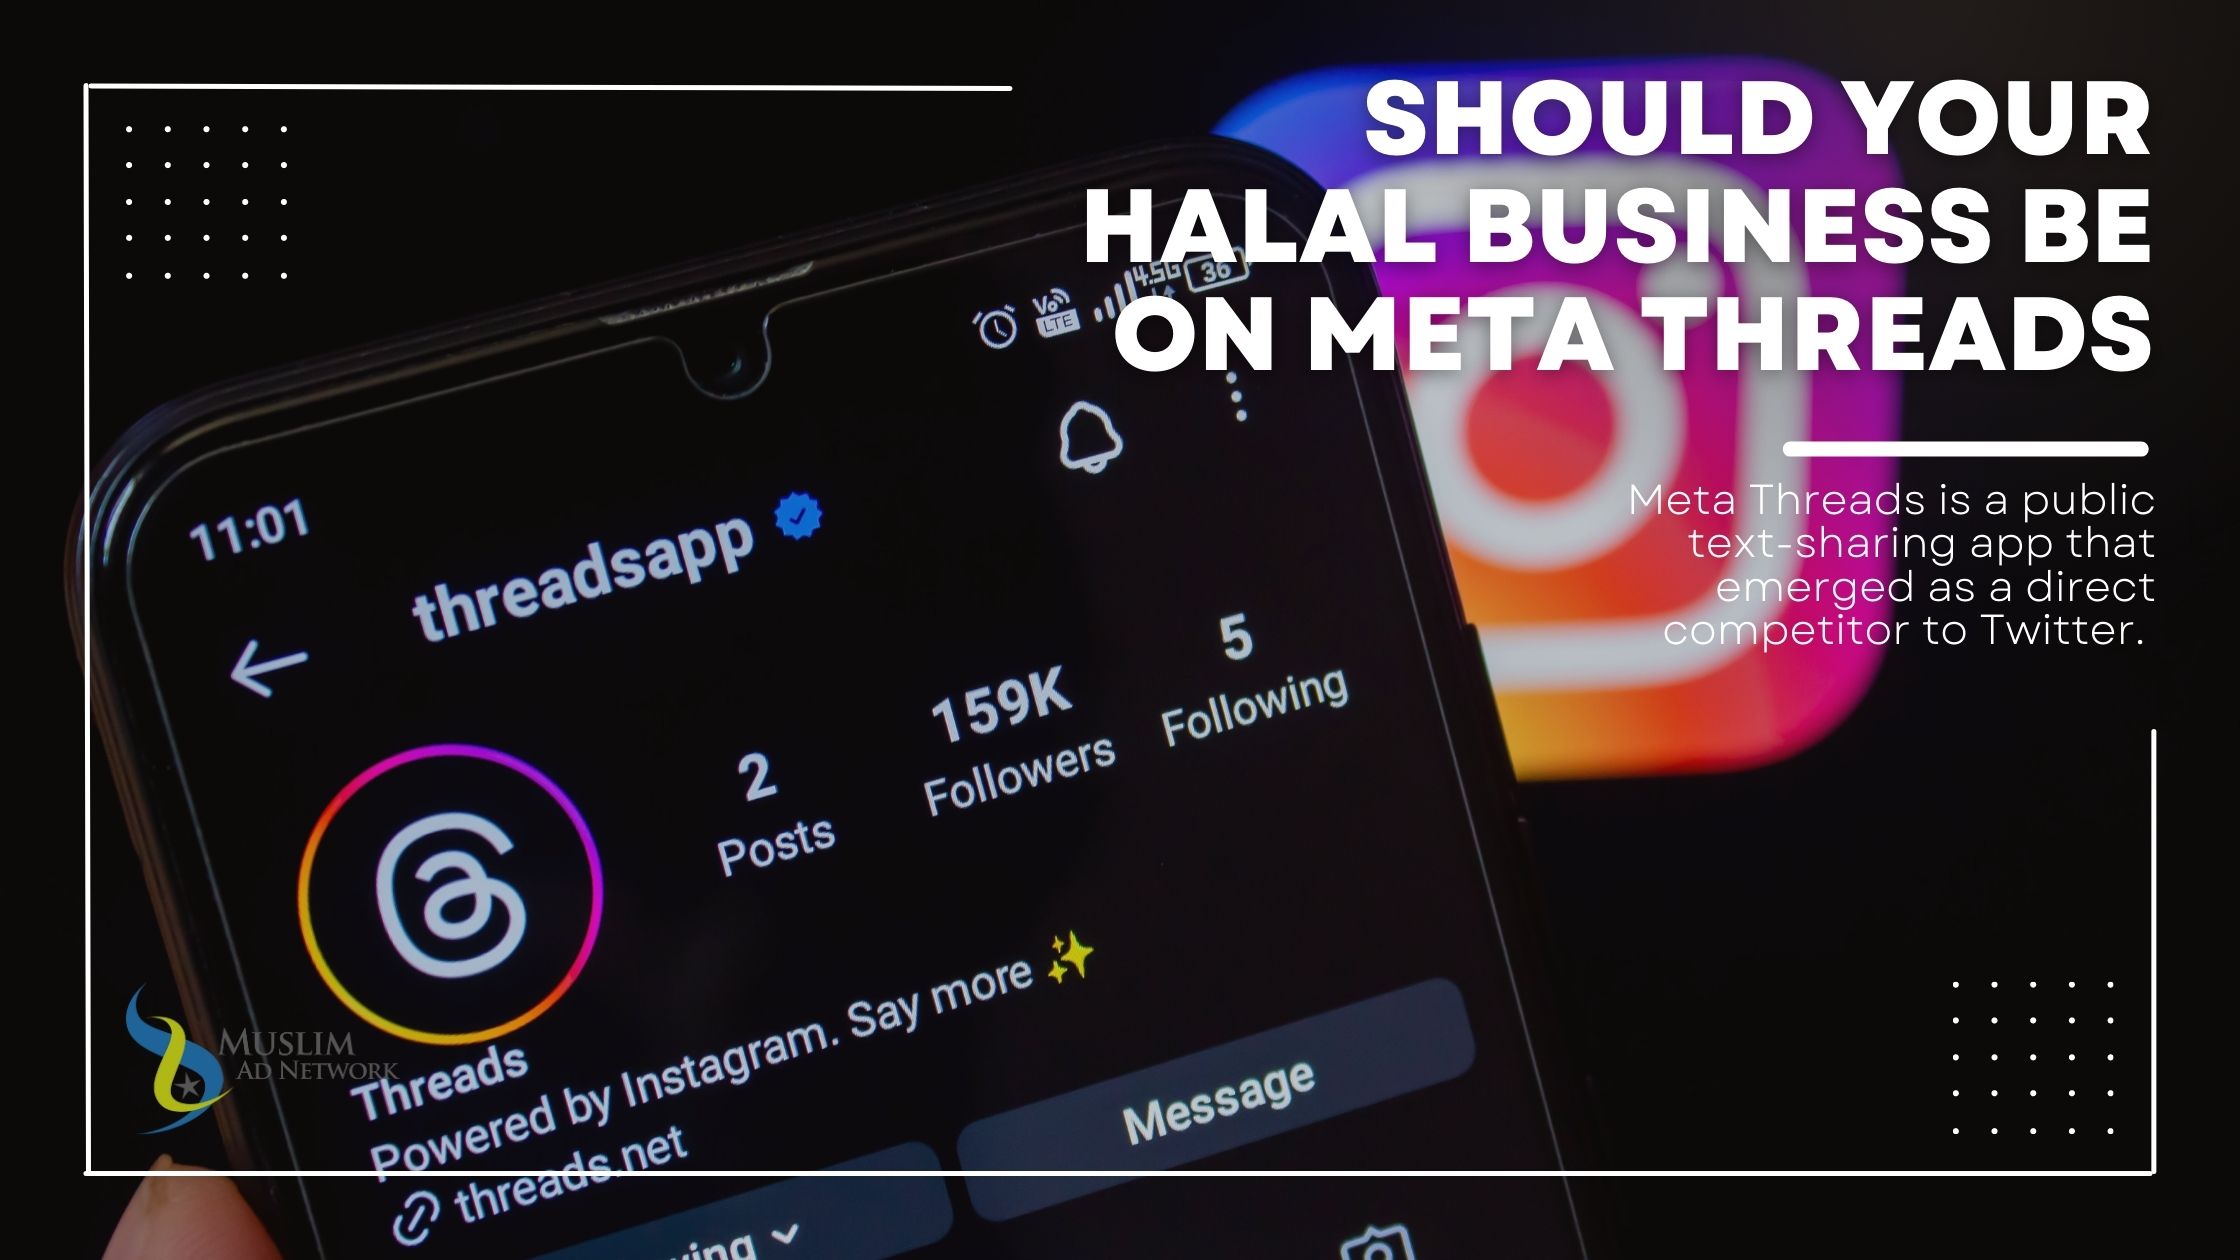 Should Your Halal Business be on Meta Threads?